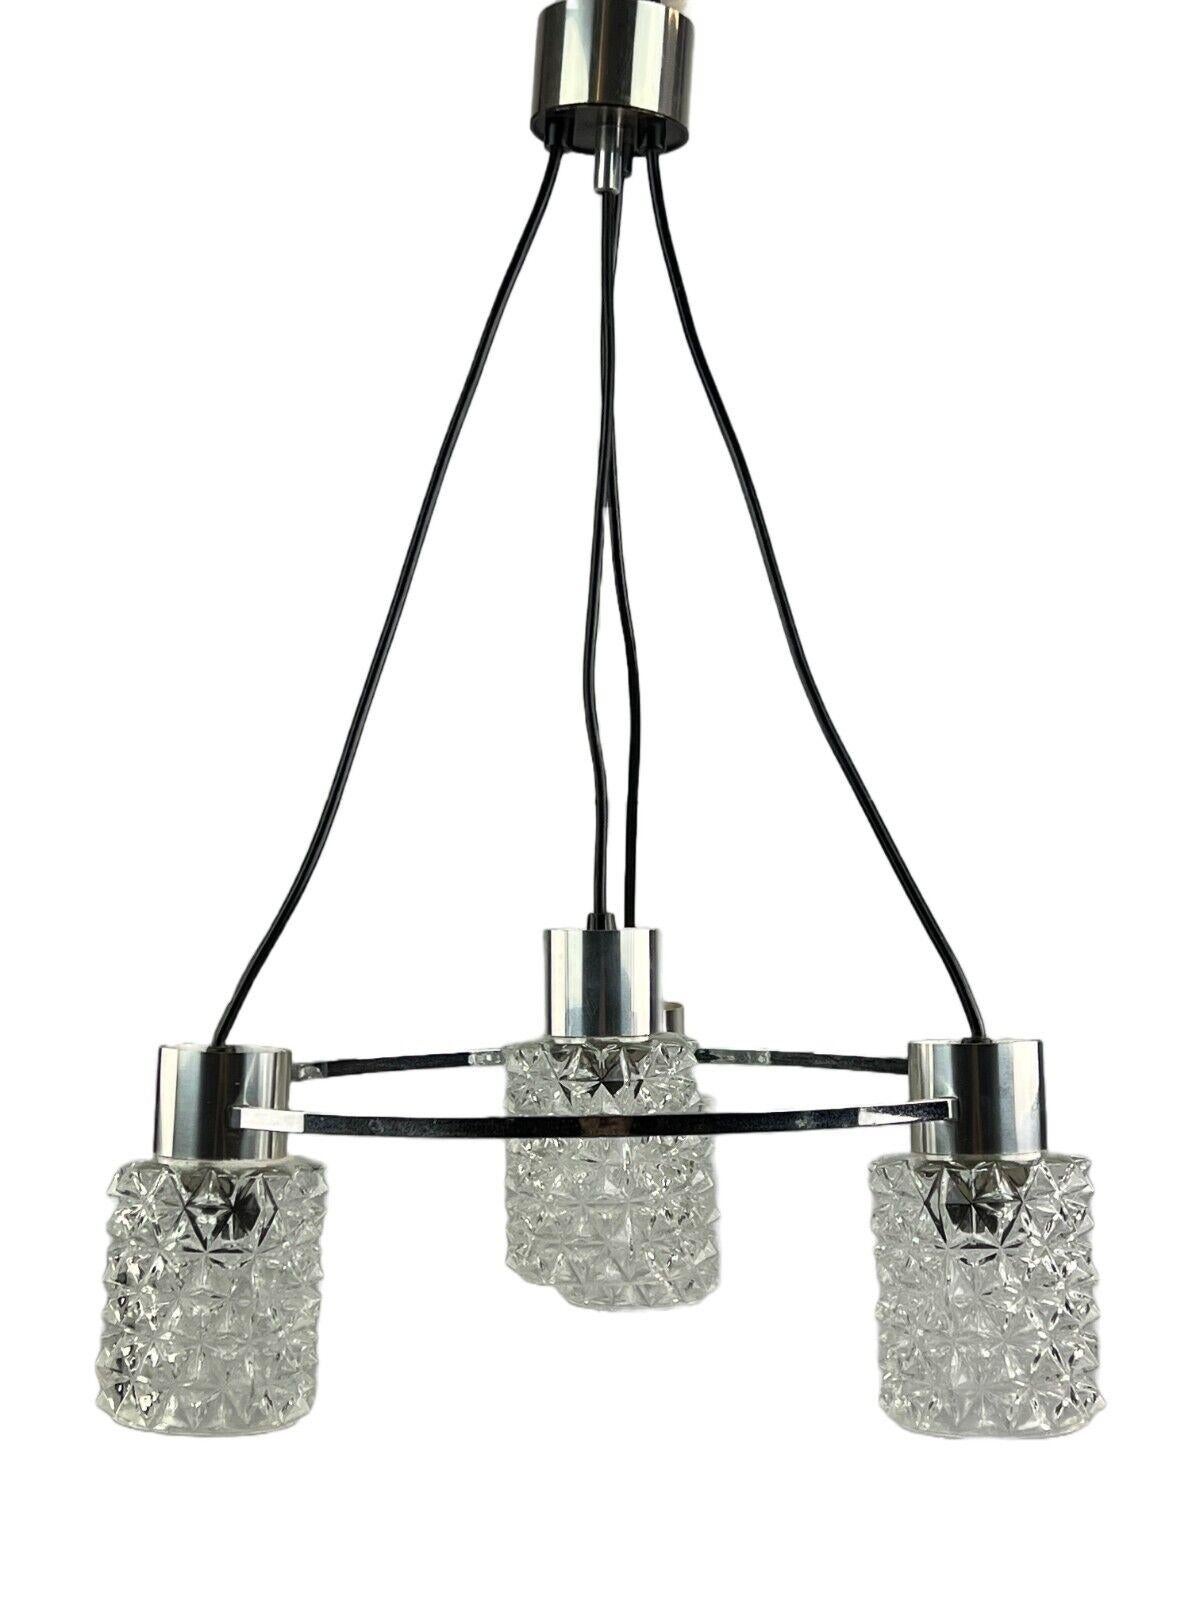 60s 70s Lamp Fixture ceiling lamp chandelier glass Chrome Space Age

Object: chandelier

Manufacturer:

Condition: good - vintage

Age: around 1960-1970

Dimensions:

Diameter = 40cm
Height = 60cm

Other notes:

4x E14 socket

The